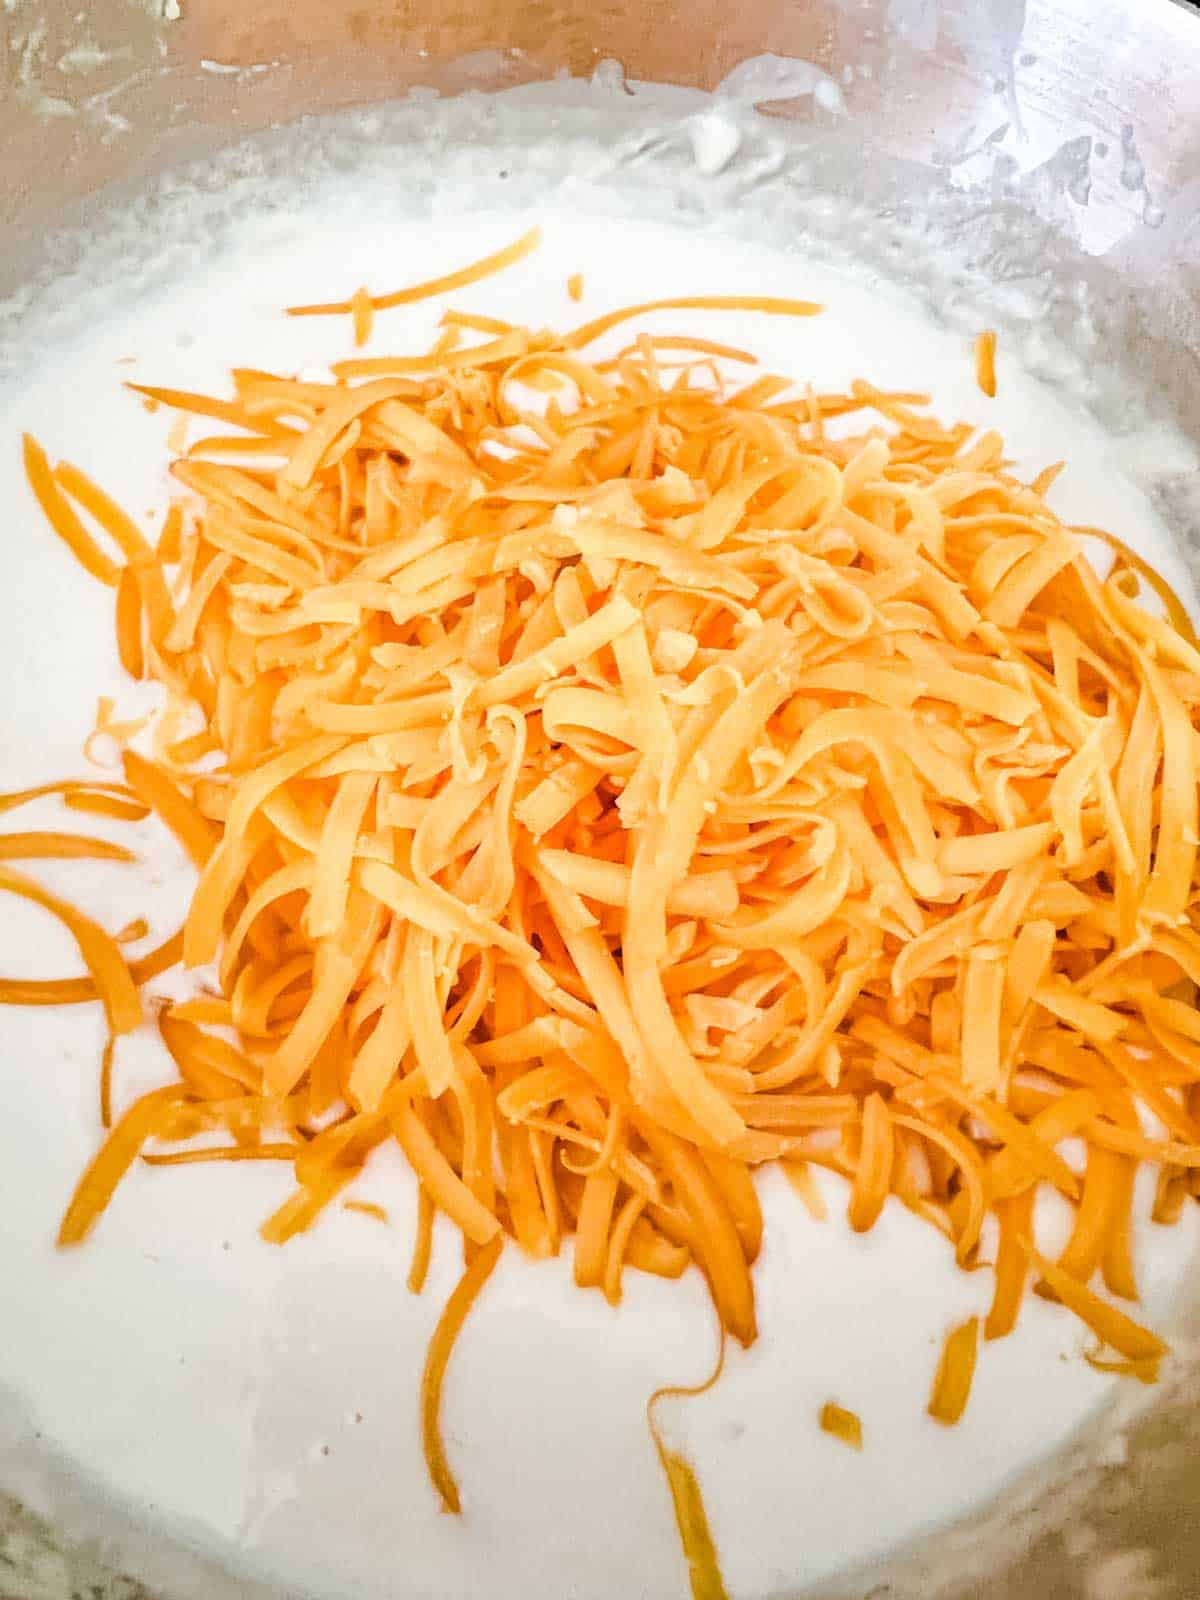 Photo of shredded cheese that has just been added to a cream sauce.